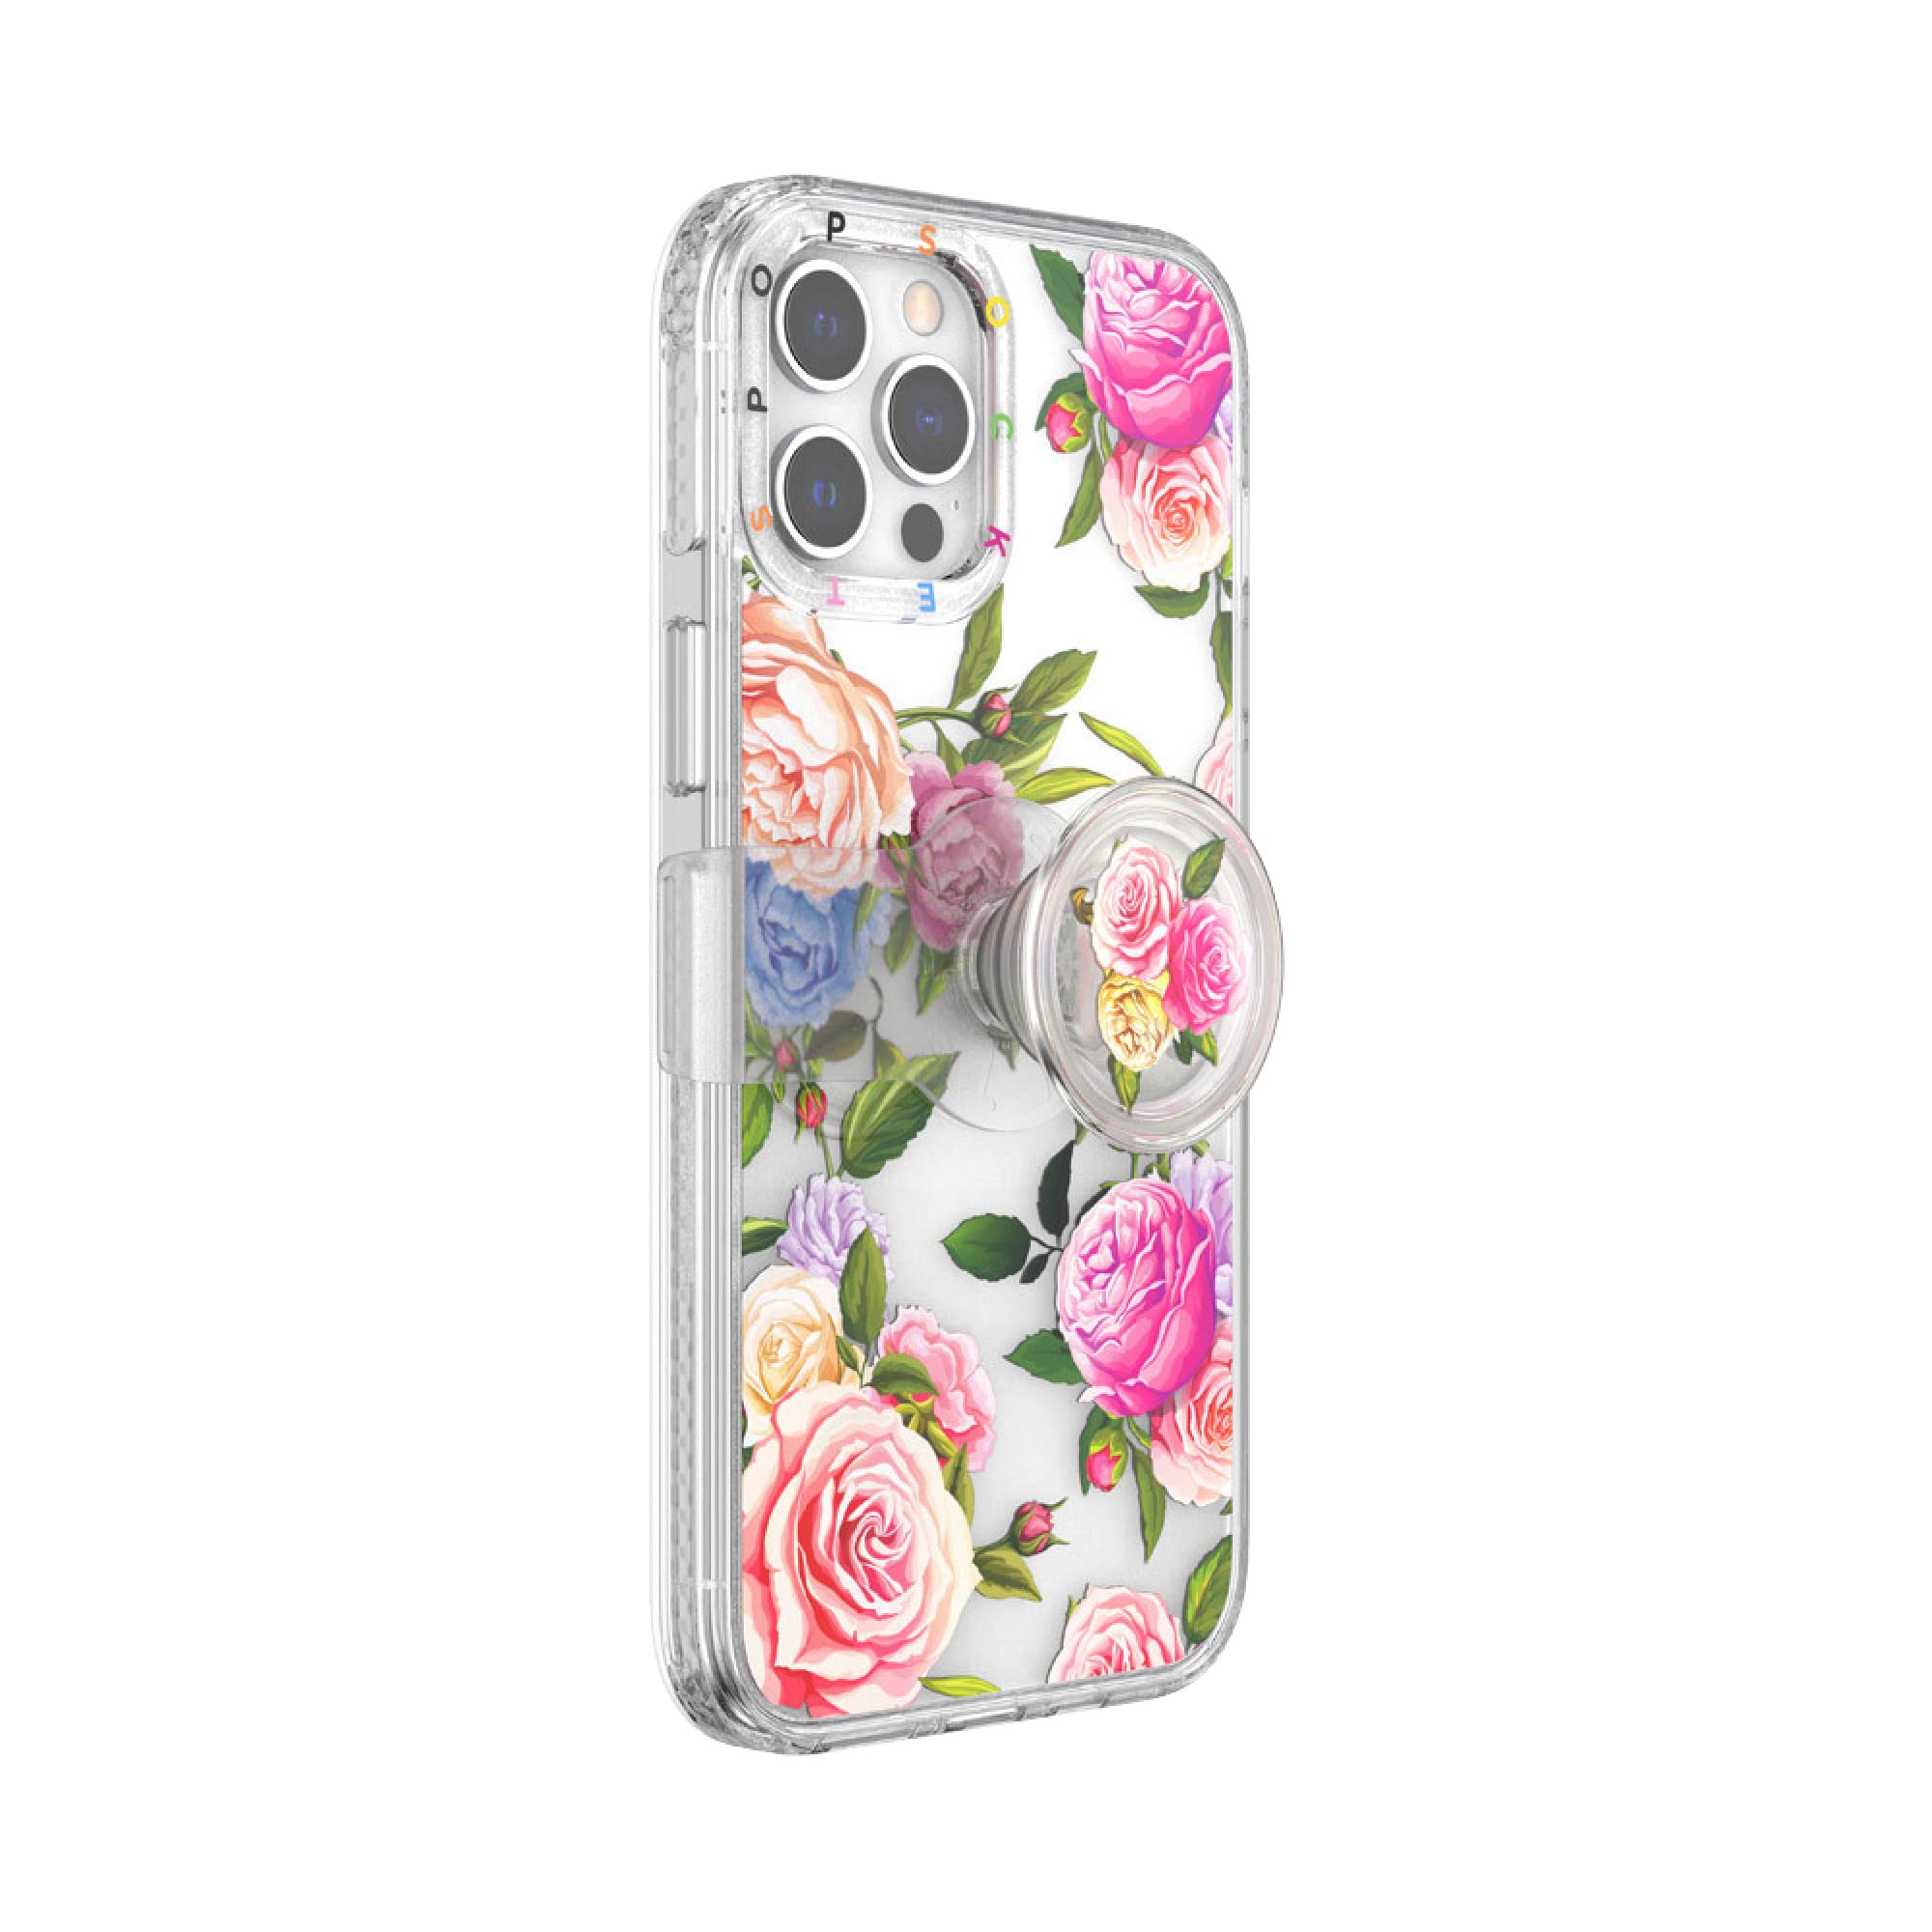 PopSockets: iPhone 12 Pro Max Case with Phone Grip and Slide, Phone Case for iPhone 12 Pro Max - Vintage Floral